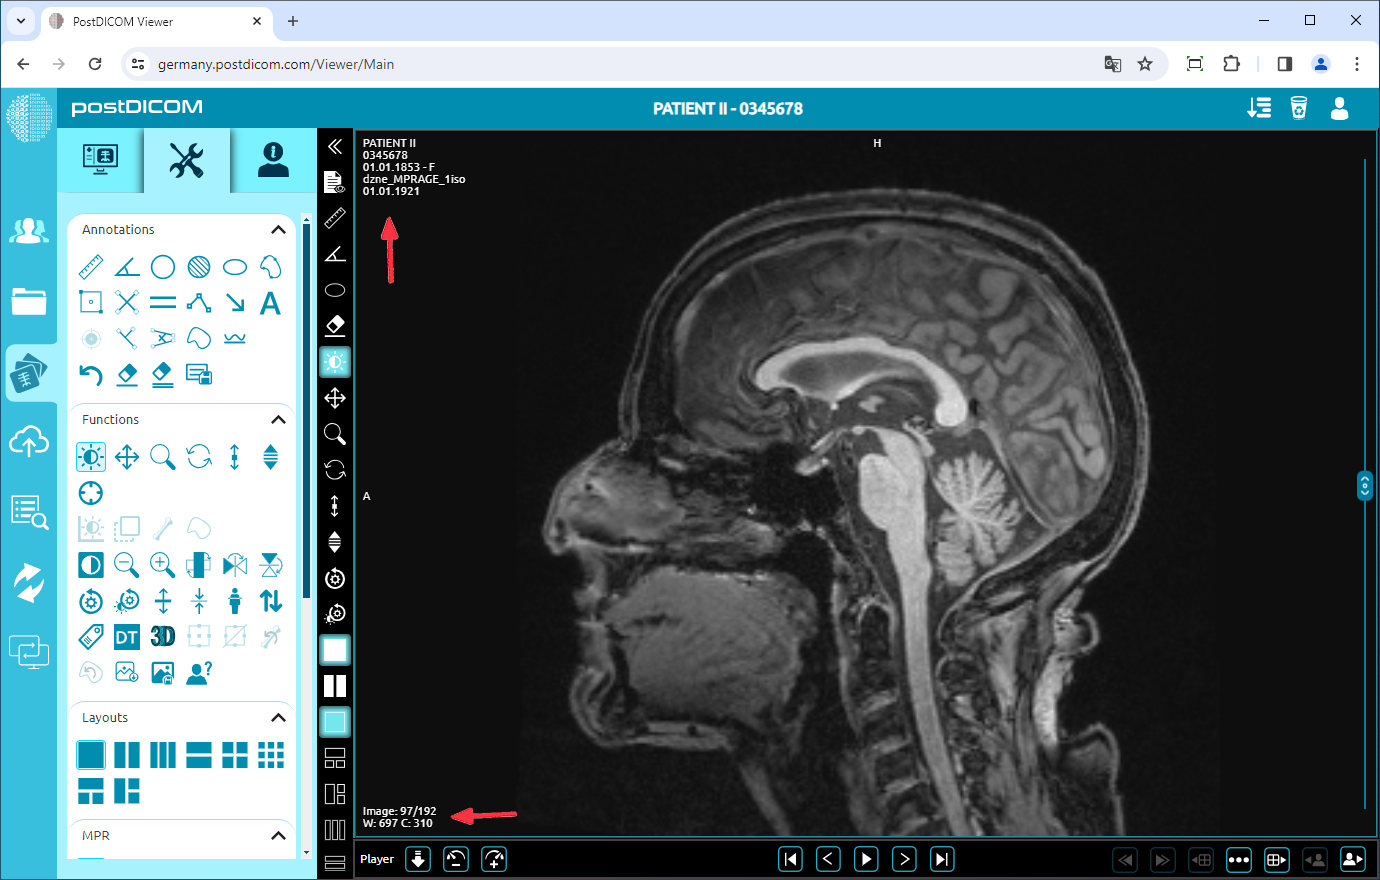 Showing/Hiding Patient Information on Viewport